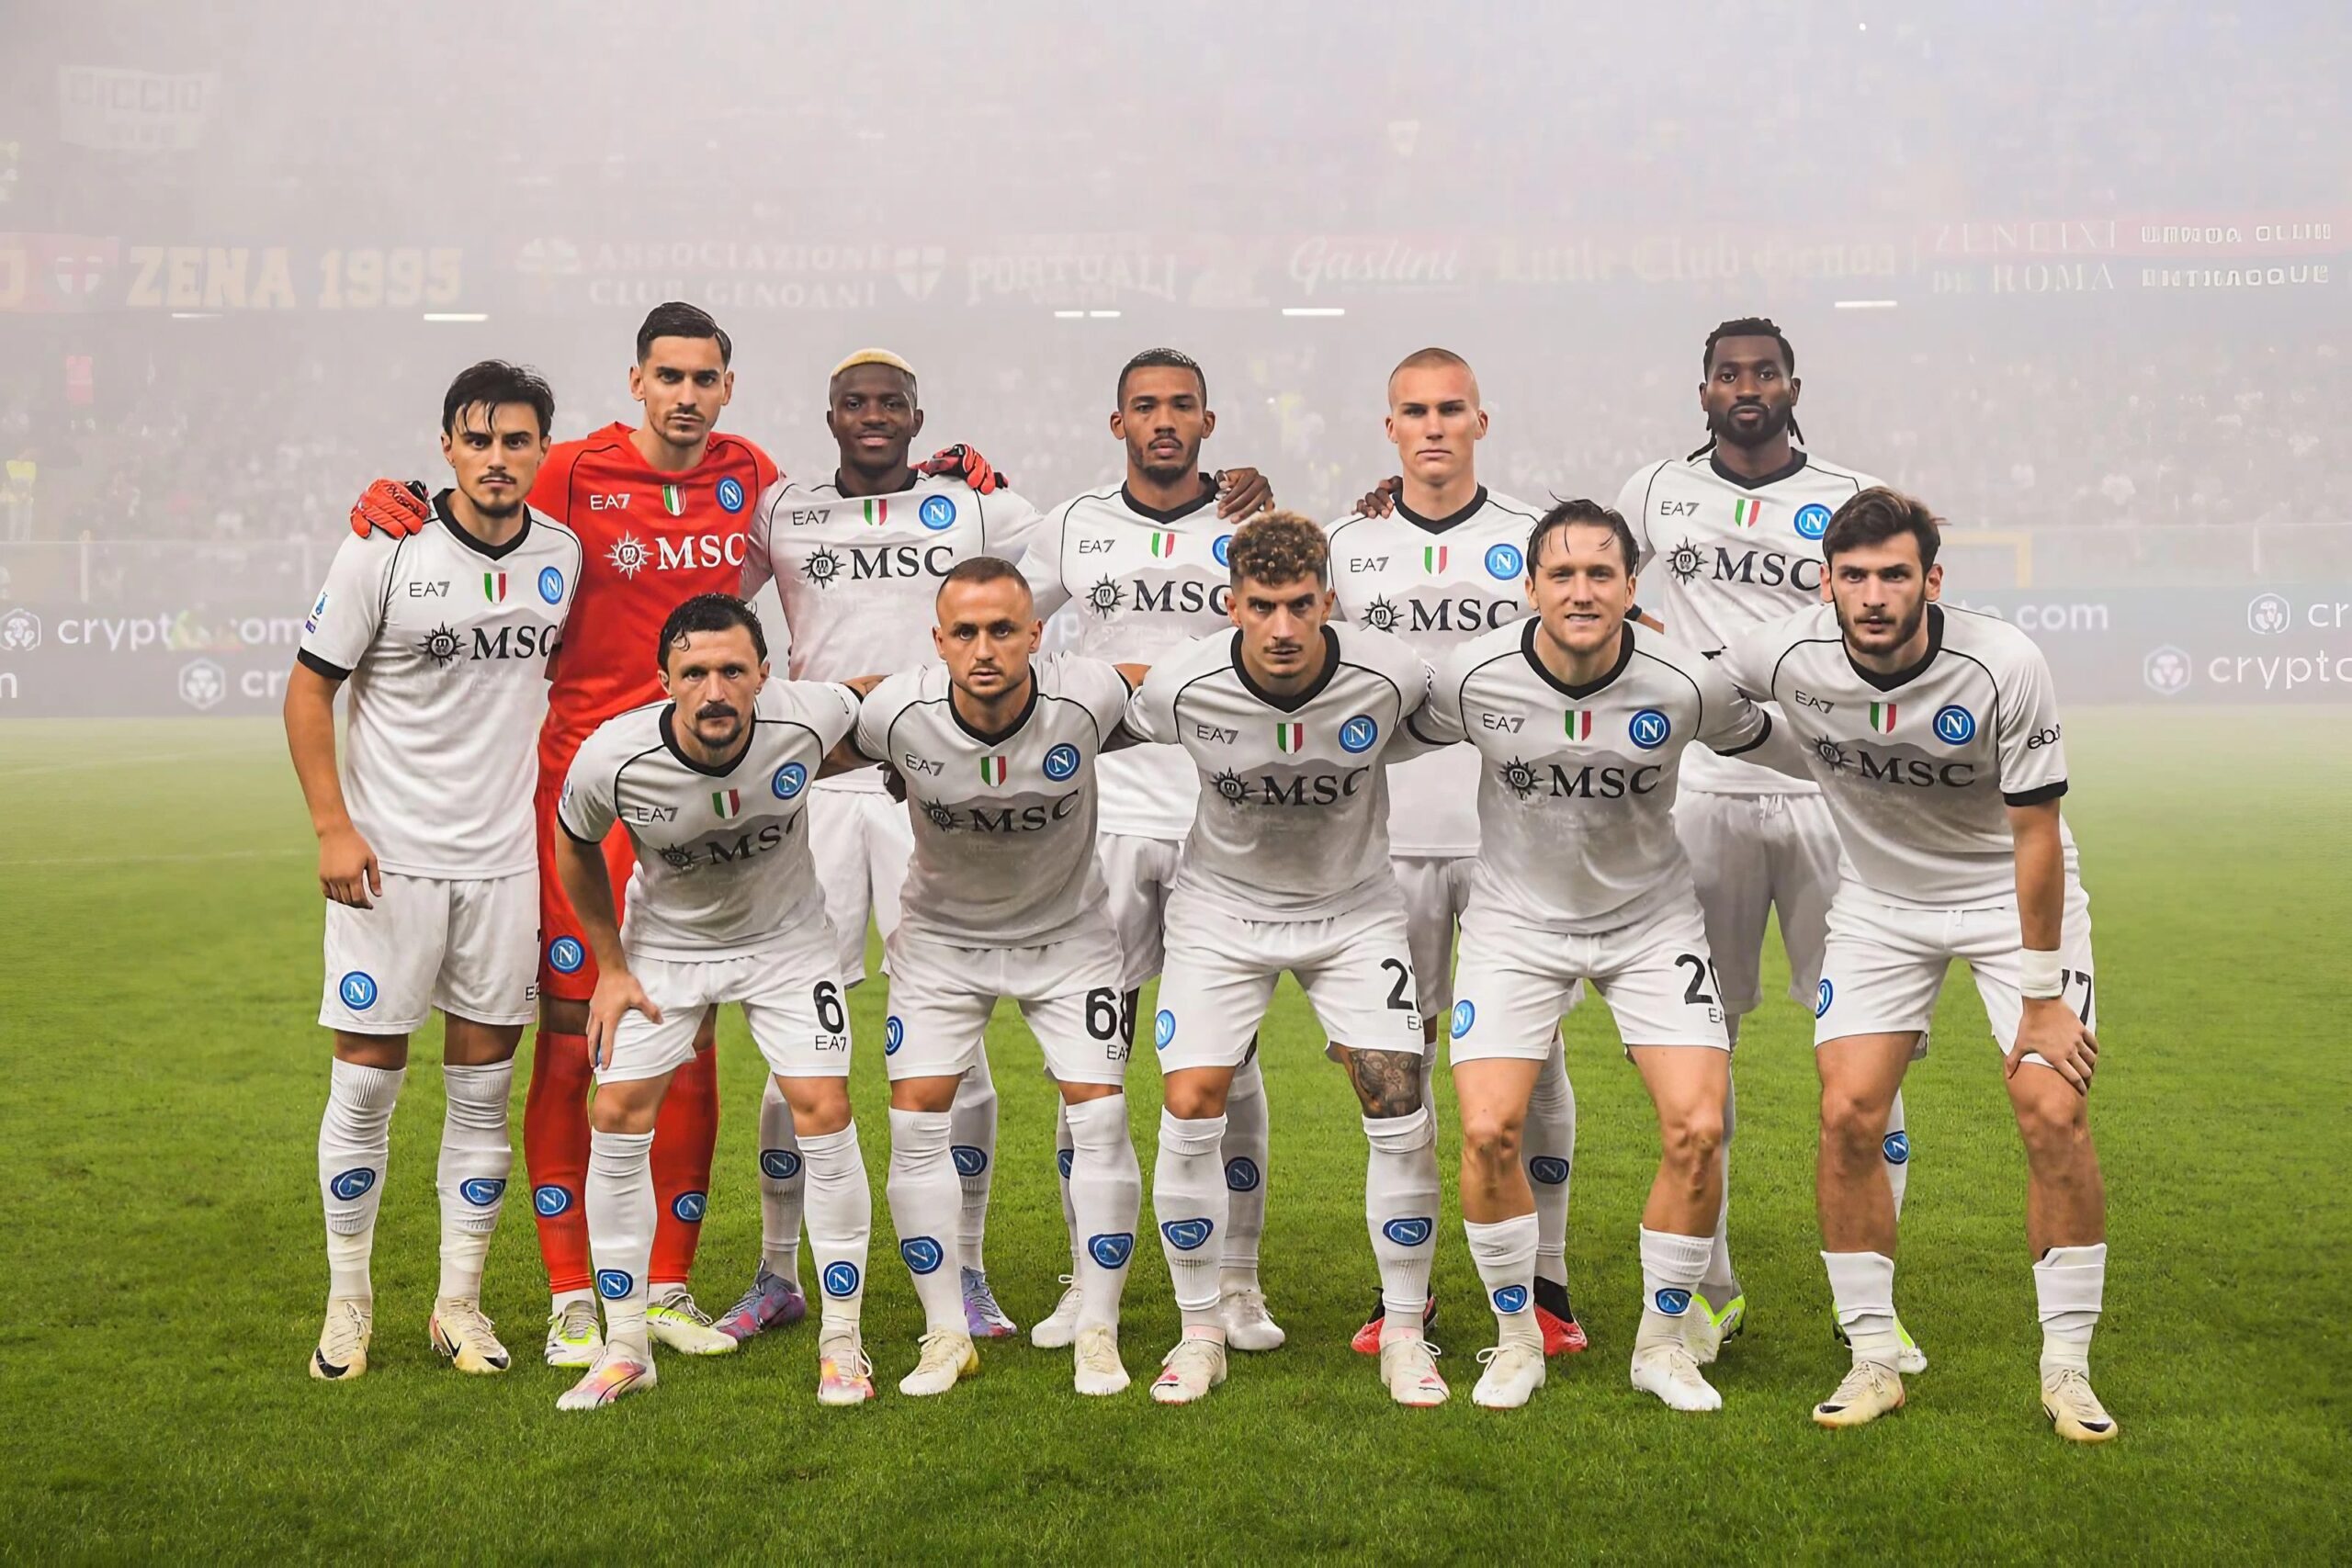 SSC Napoli team posing before a match